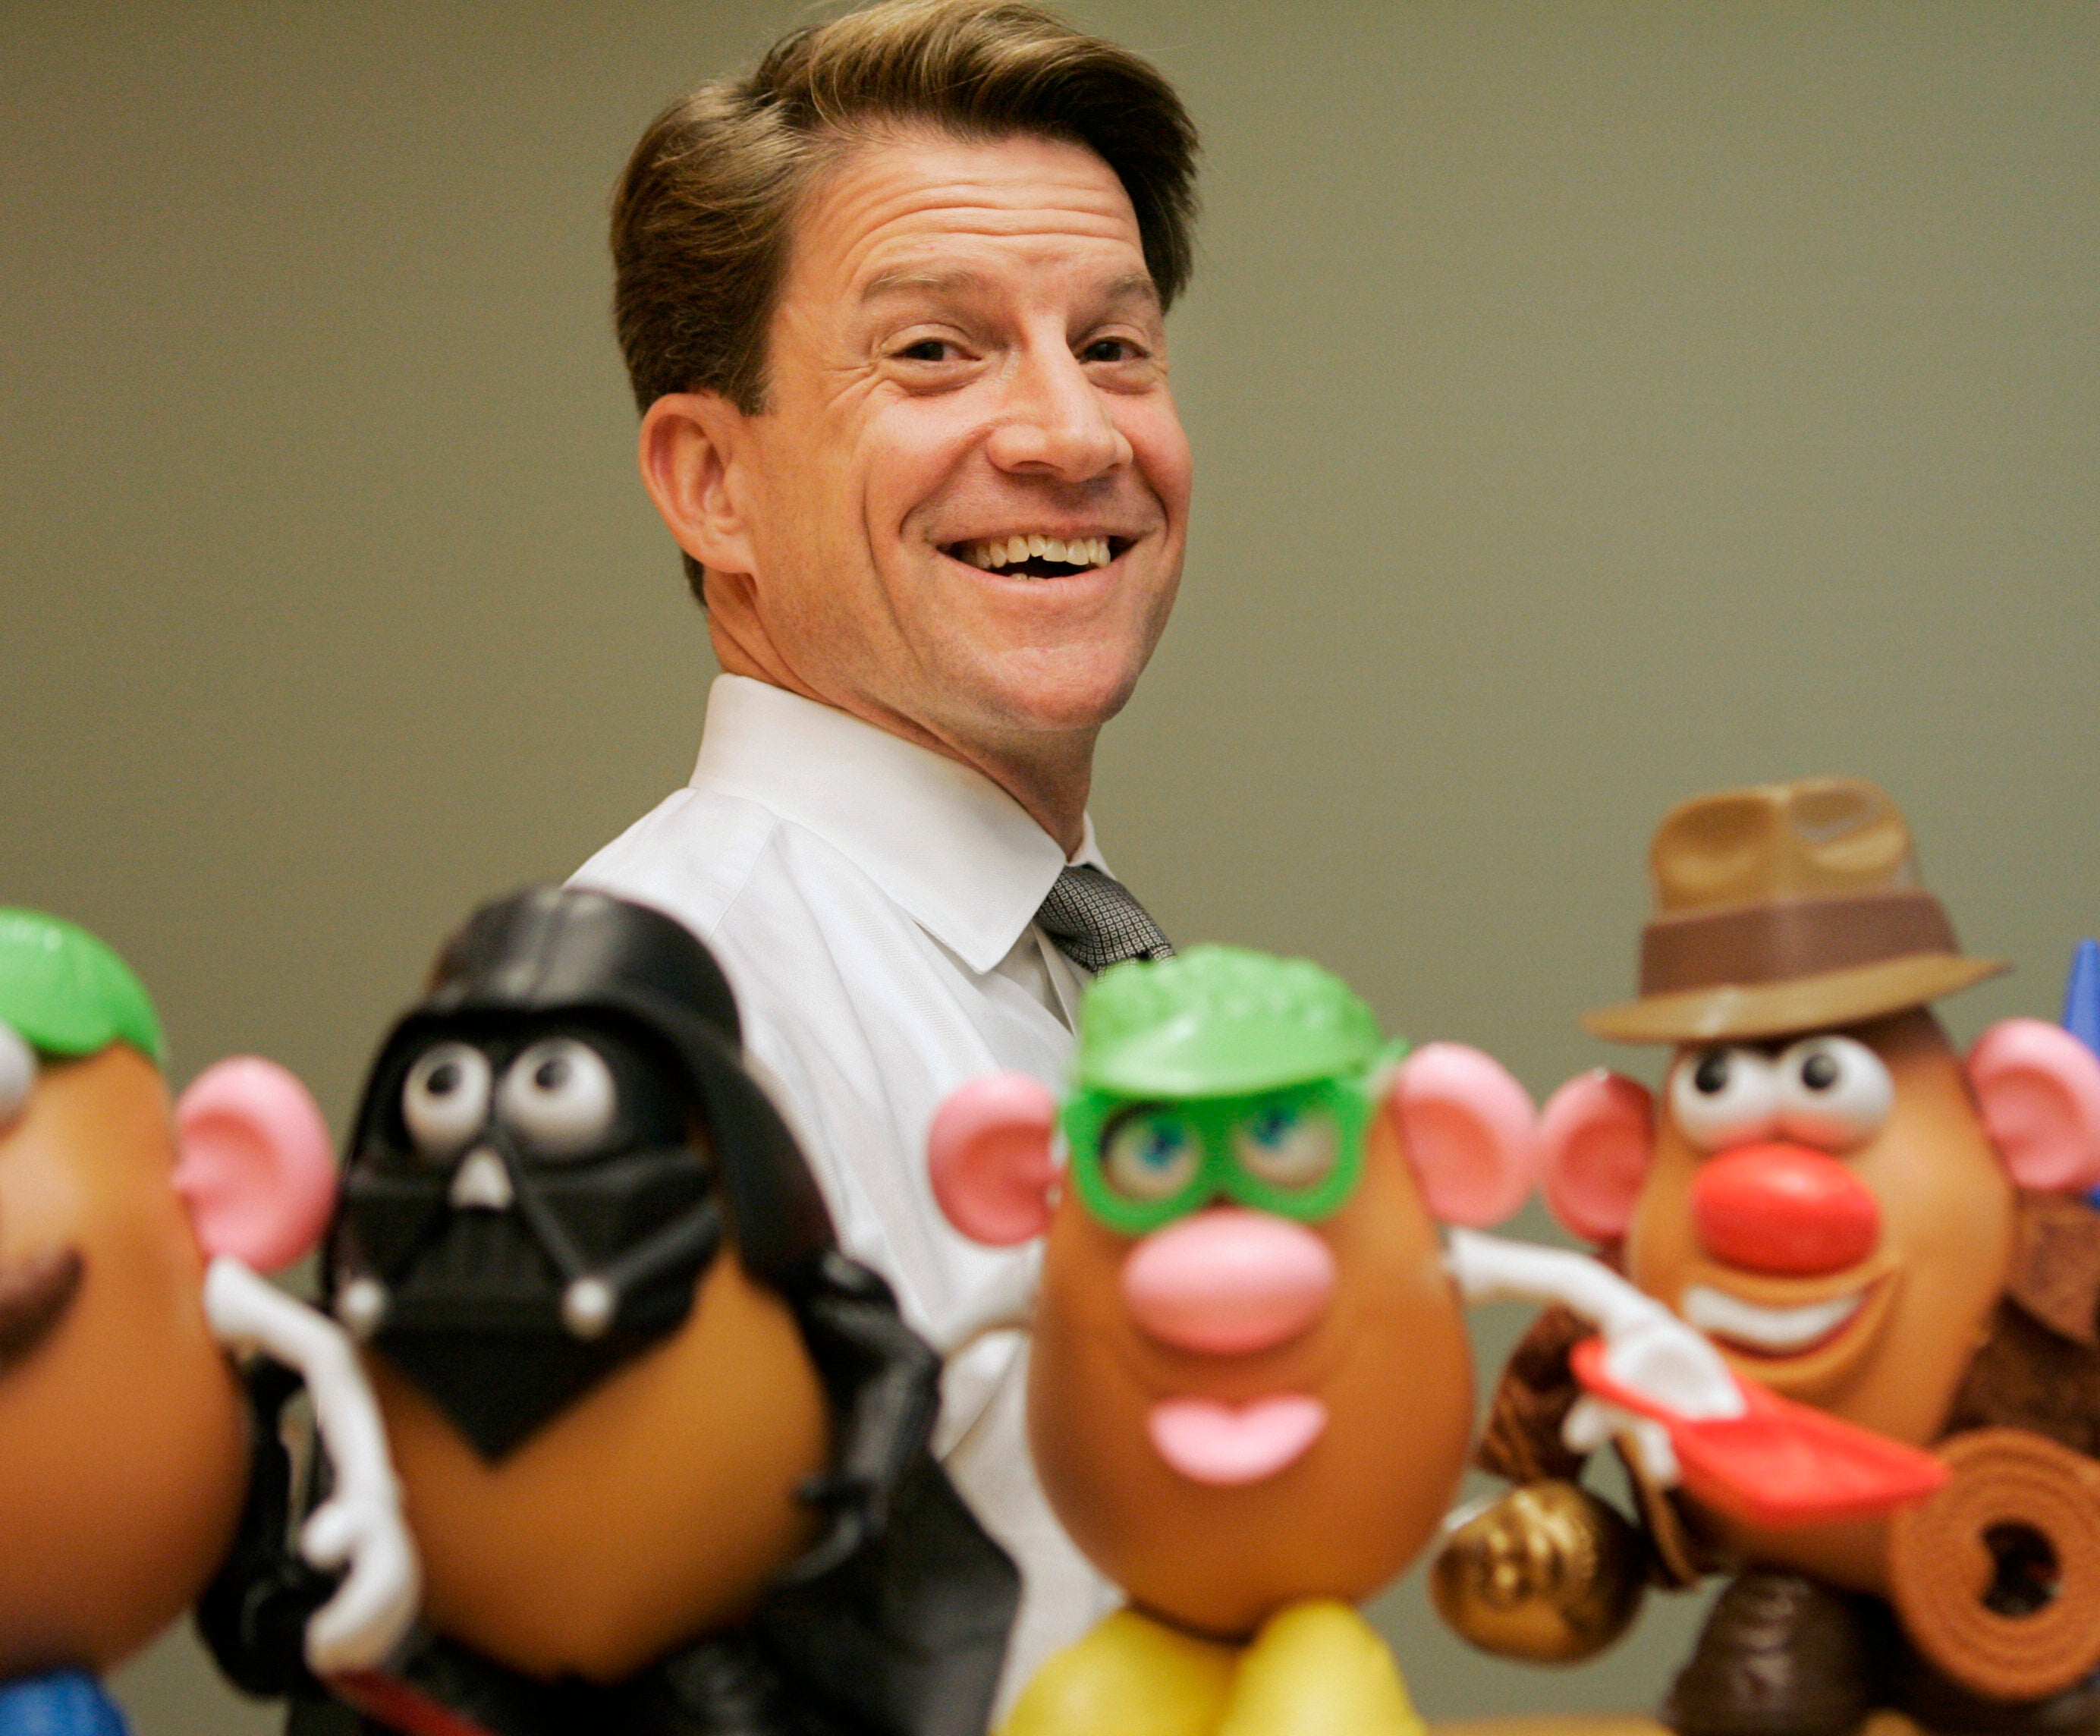 In this 2008 file photo, Brian Goldner stands next to some toy figures at Hasbro’s headquarters, in Pawtucket, Rhode Island